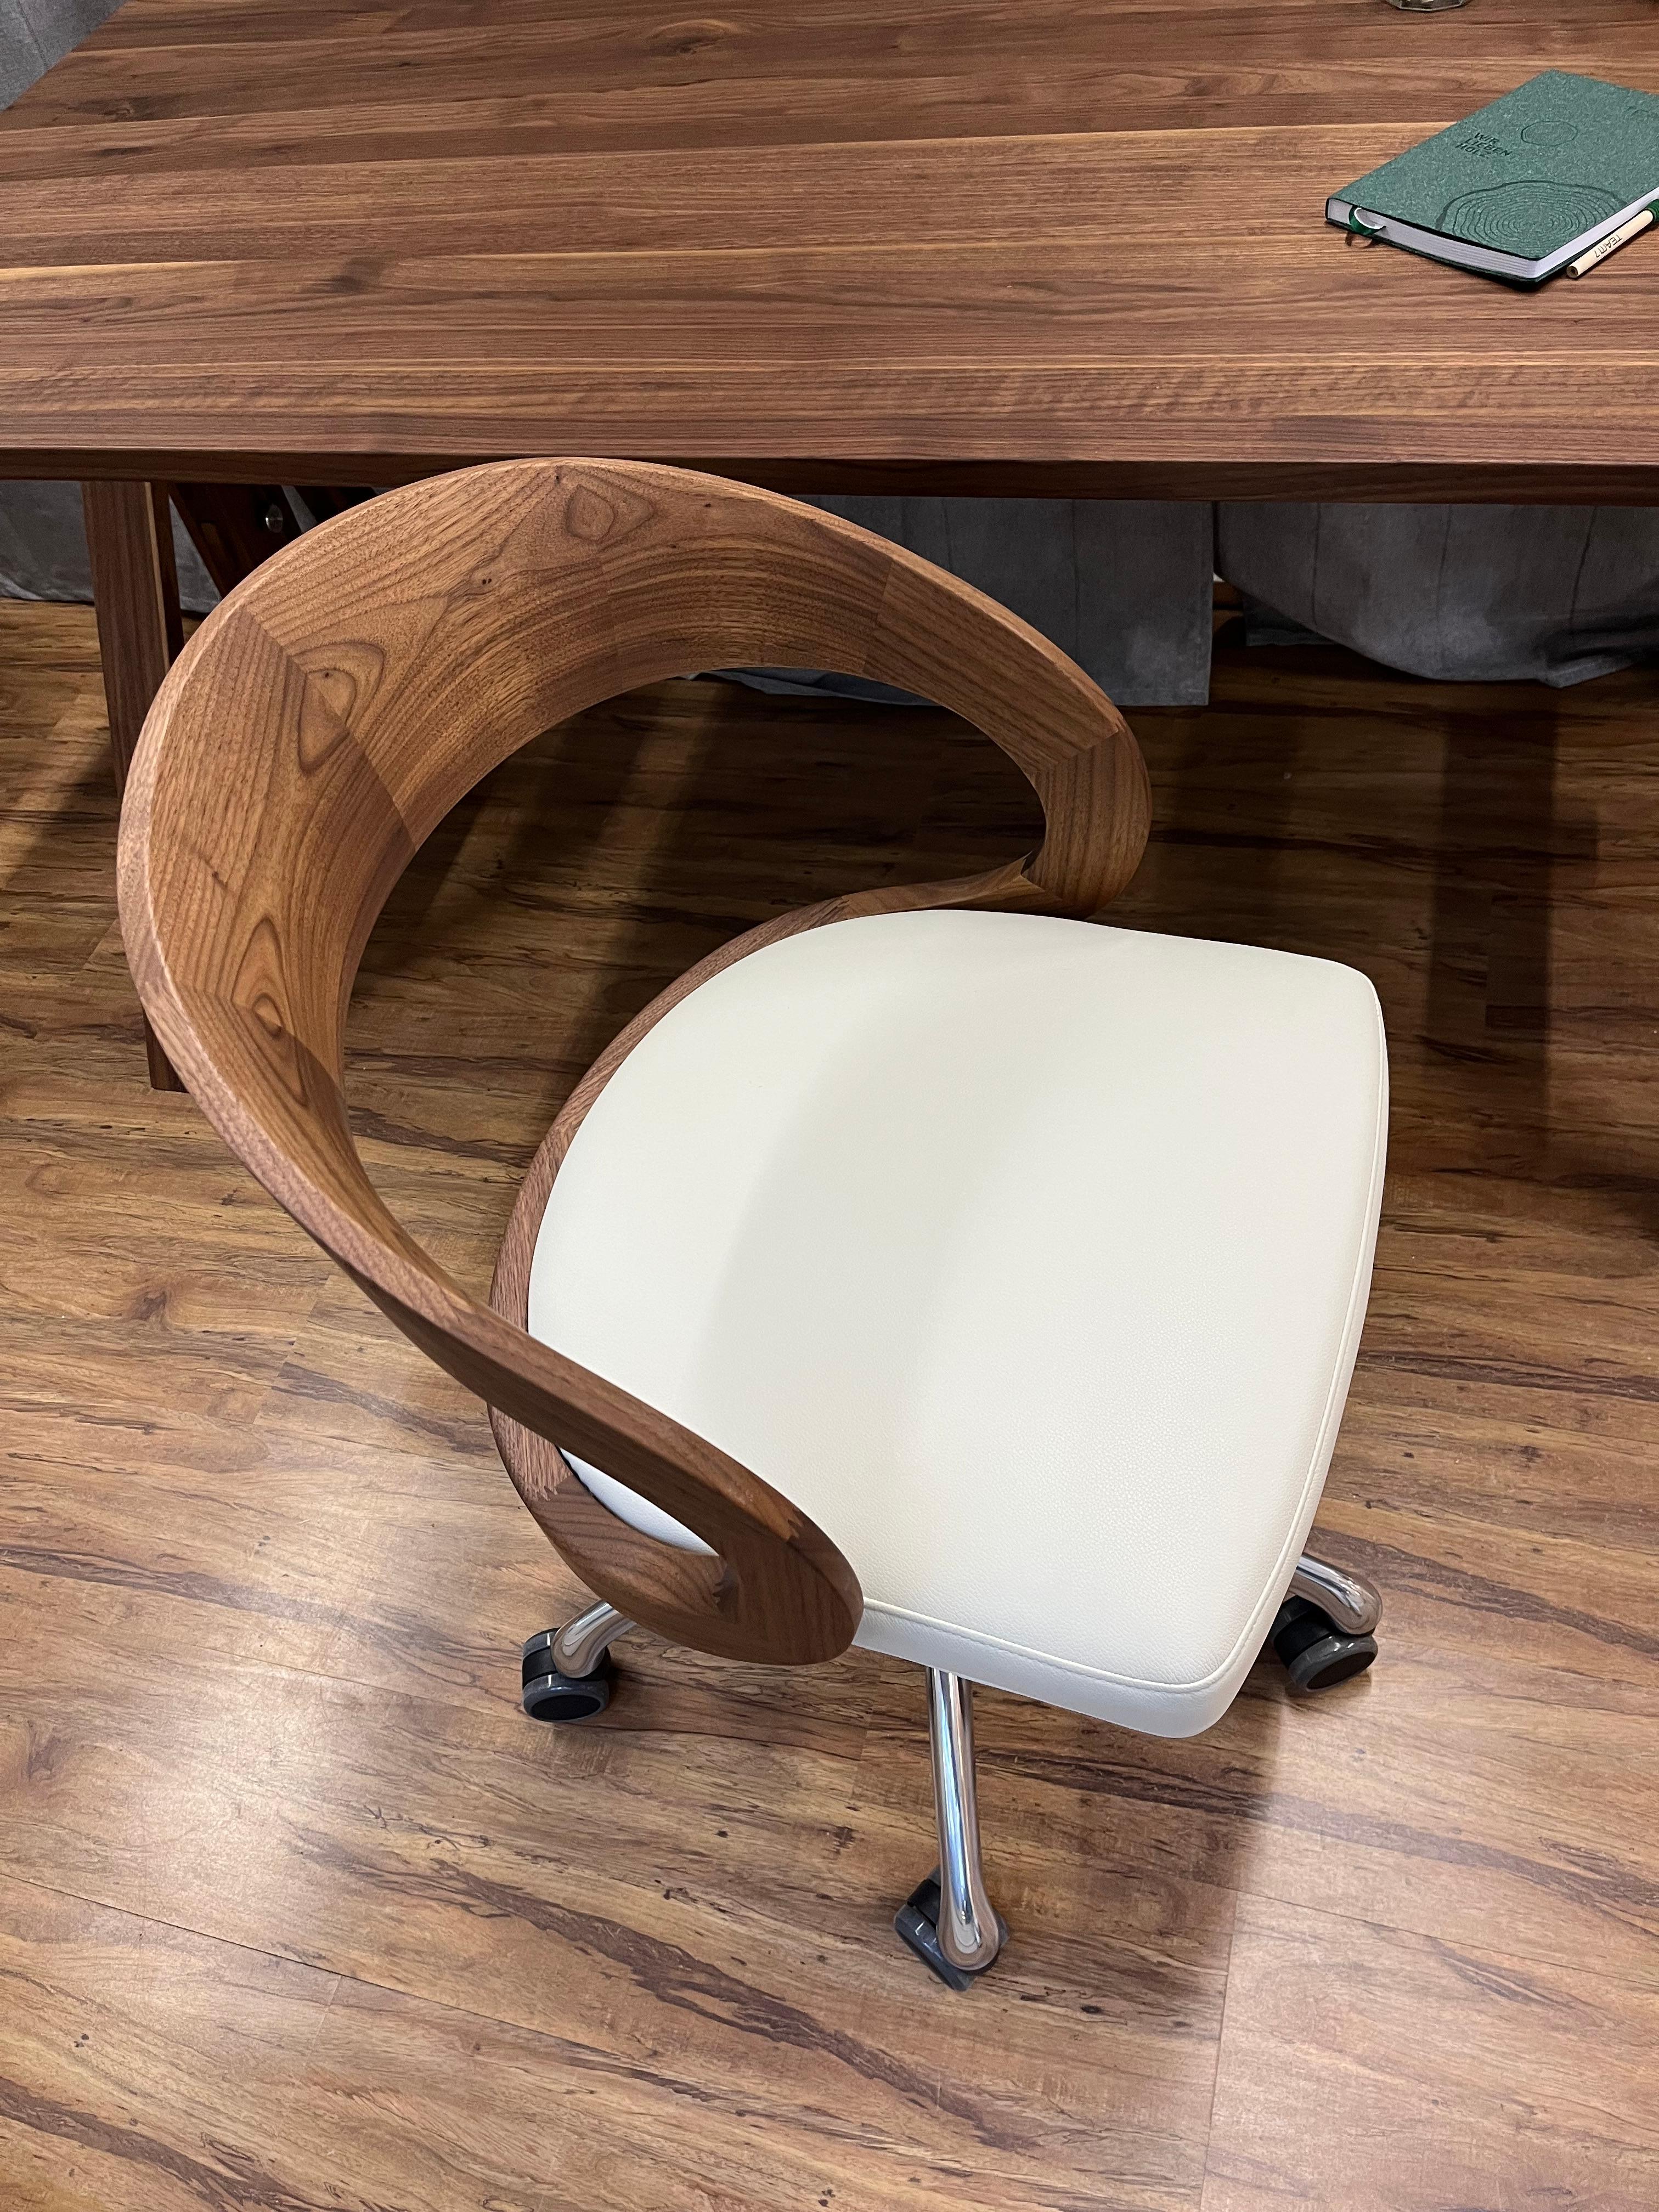 The sculpture-like backrest makes this chair both unique and extremely comfortable. Its superior seating comfort makes it perfect for working from home. The adjustable seat height ranges from 17in to 22.5in. This chair is versatile and customizable.